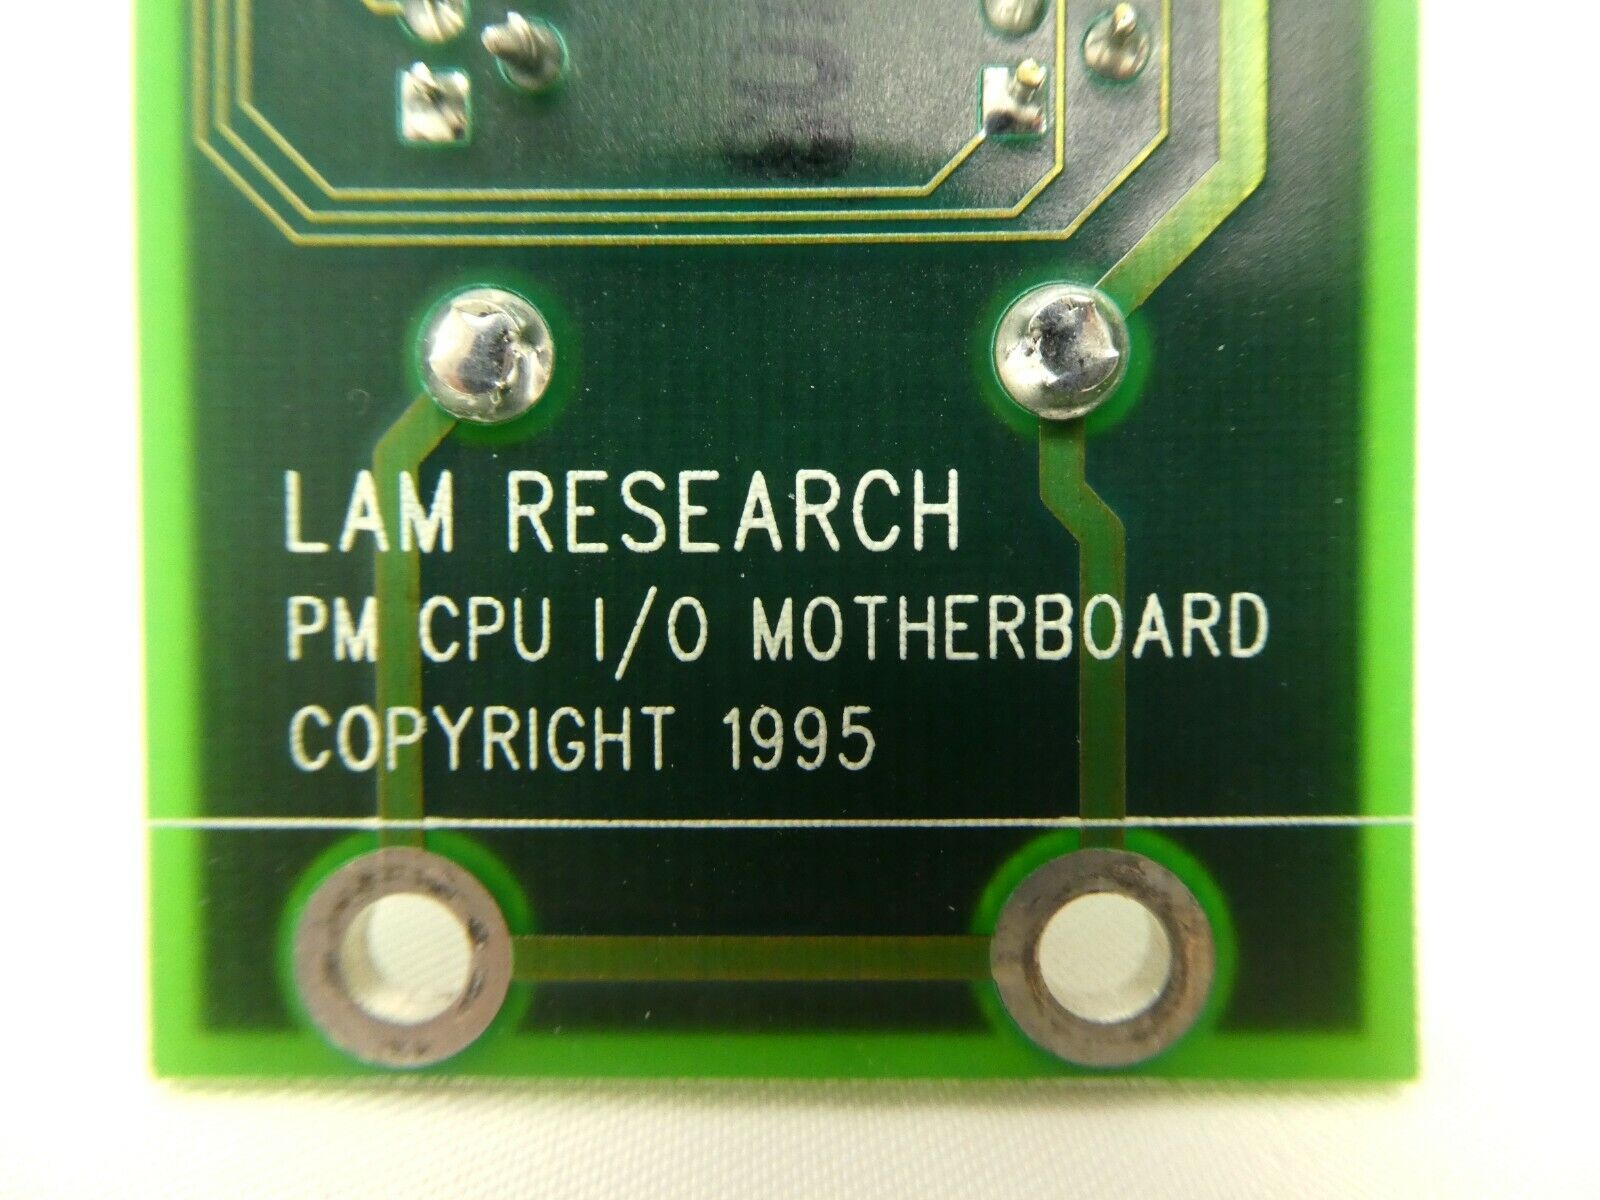 Lam Research 810-049336-002 PM CPU I/O Motherboard Backplane PCB Continuum Spare